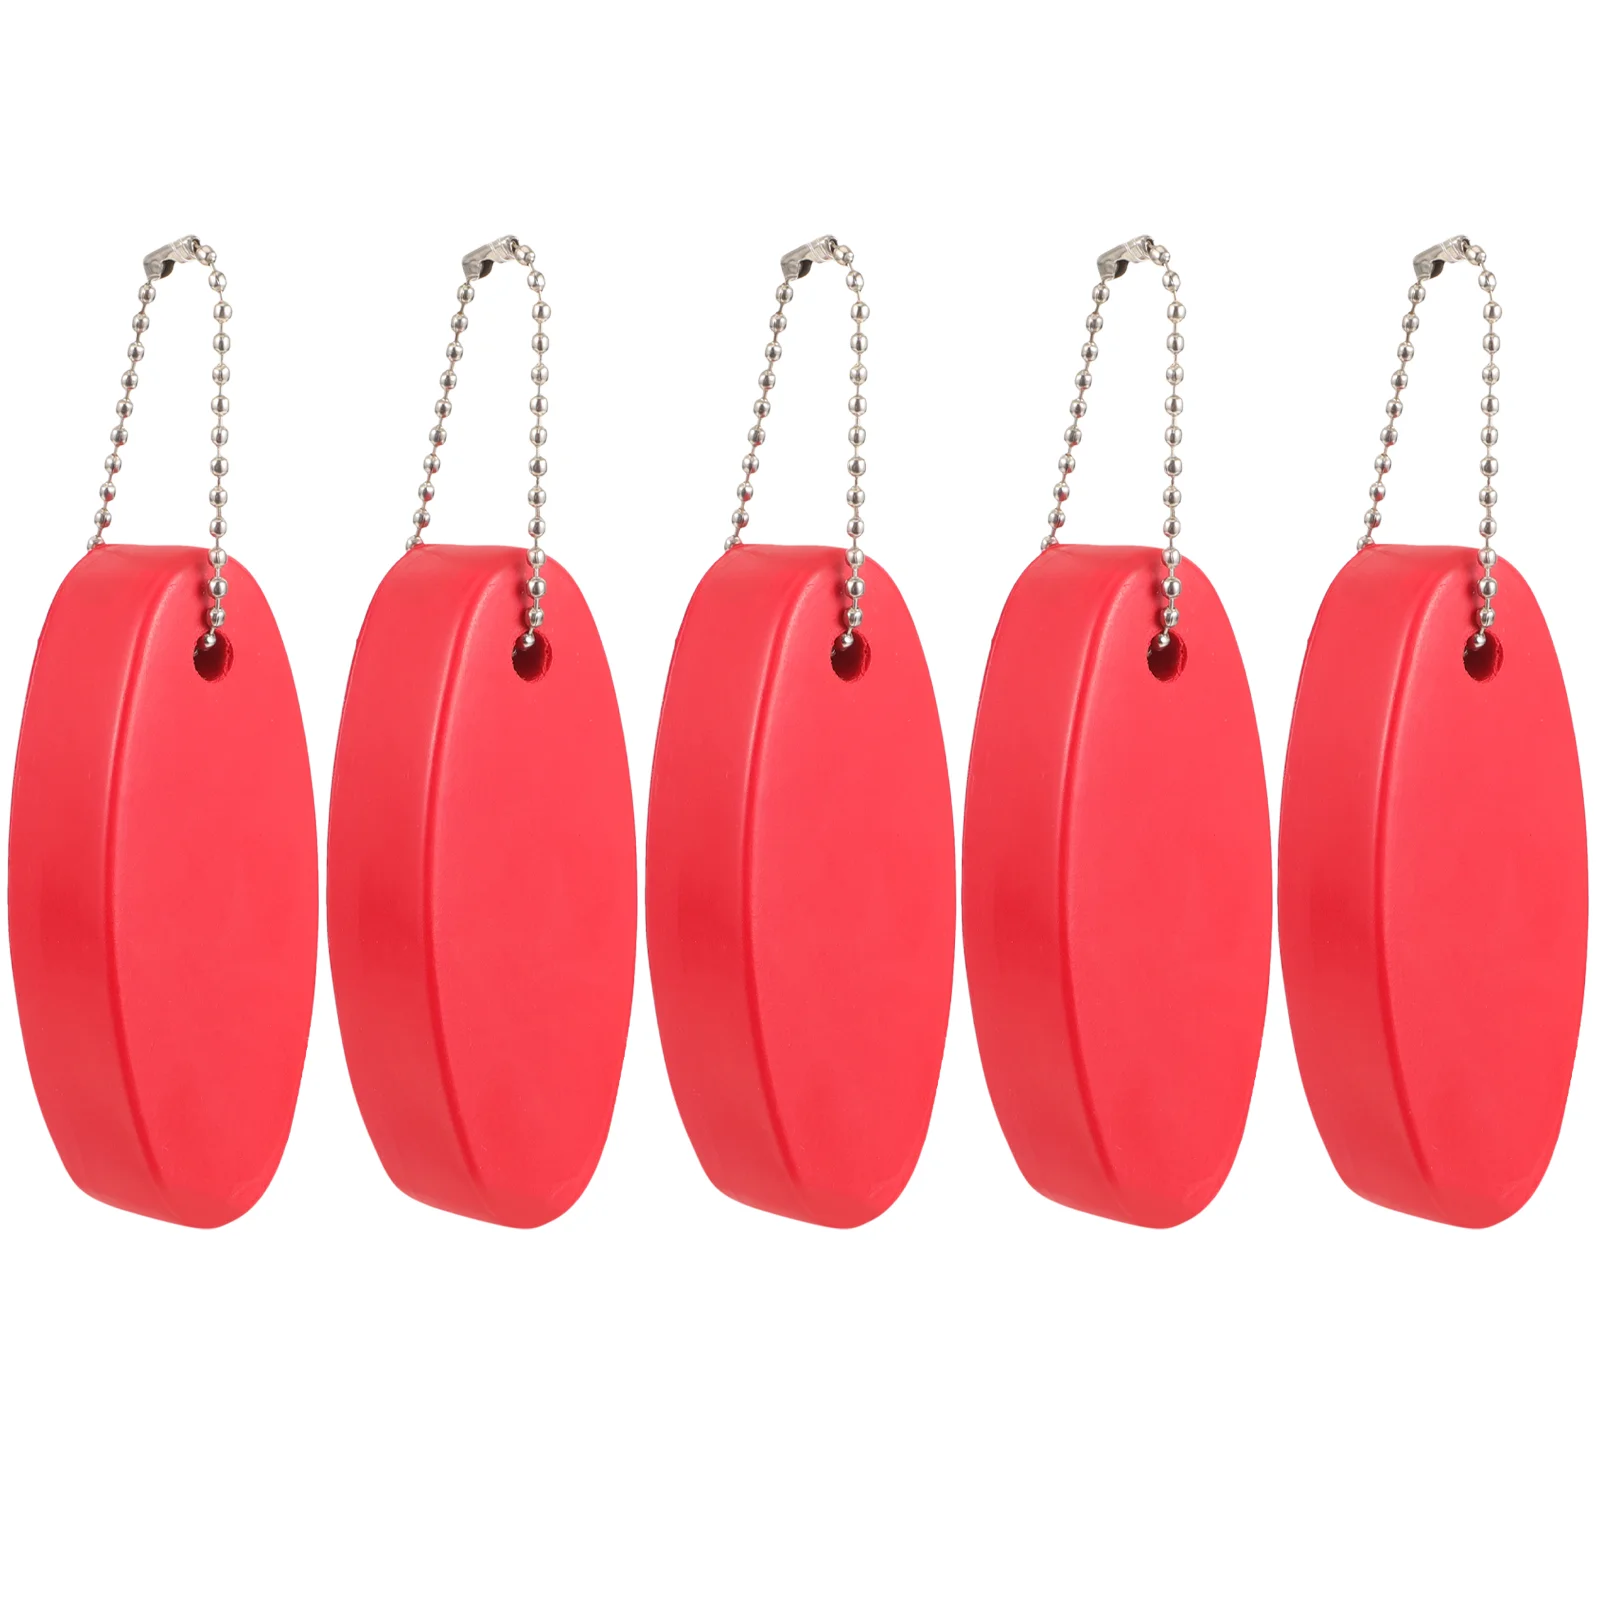 5Pcs Floating Keychains Colored Floating Key Rings Water Sports Keychains Surfboard Pendant Keychains 6pcs sports elements keychains decorative souvenir keychains colored table tennis elements keychains